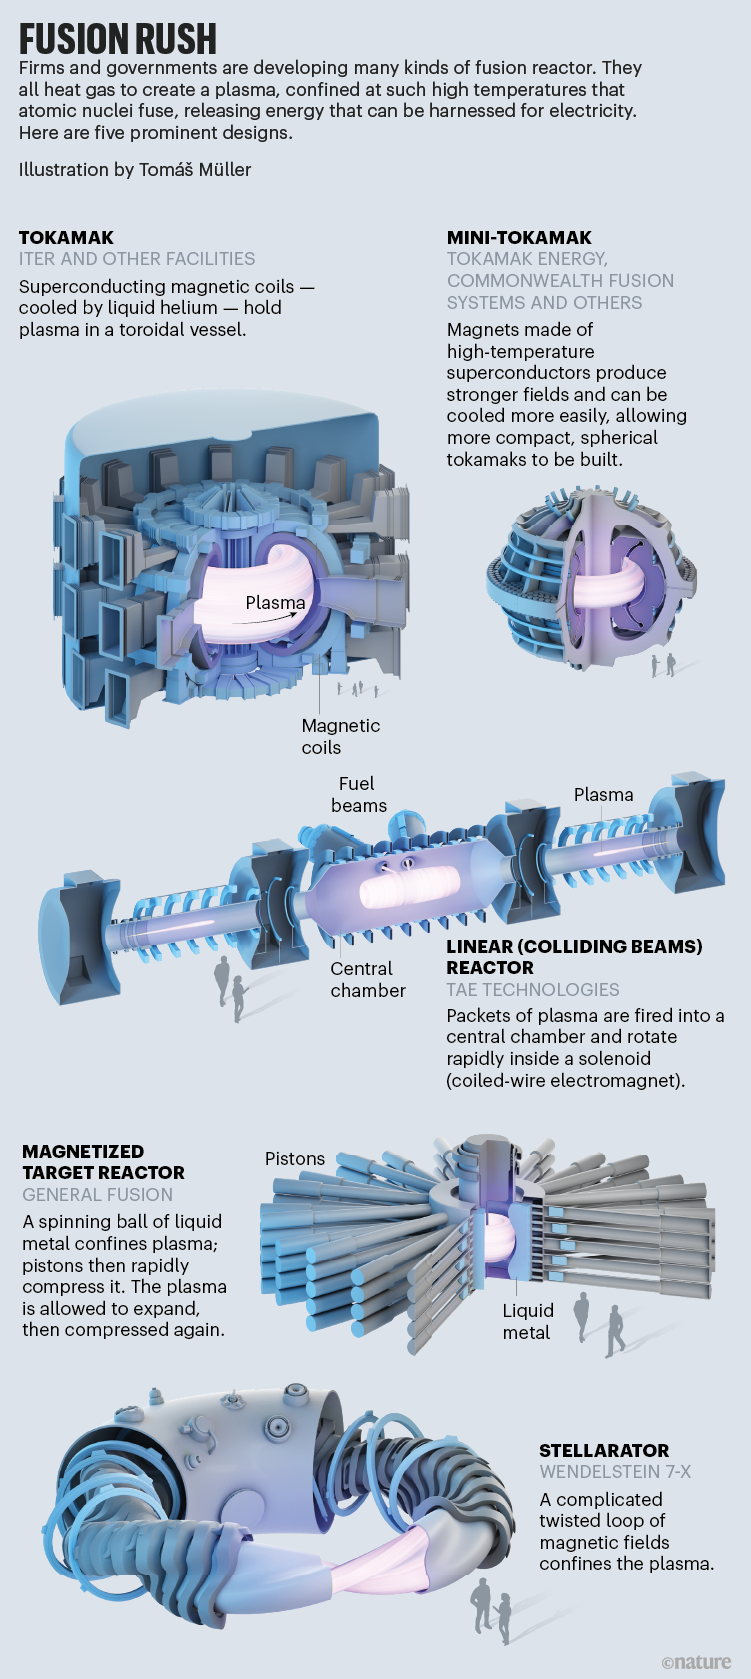 Fusion rush. Infographic showing five reactor designs.